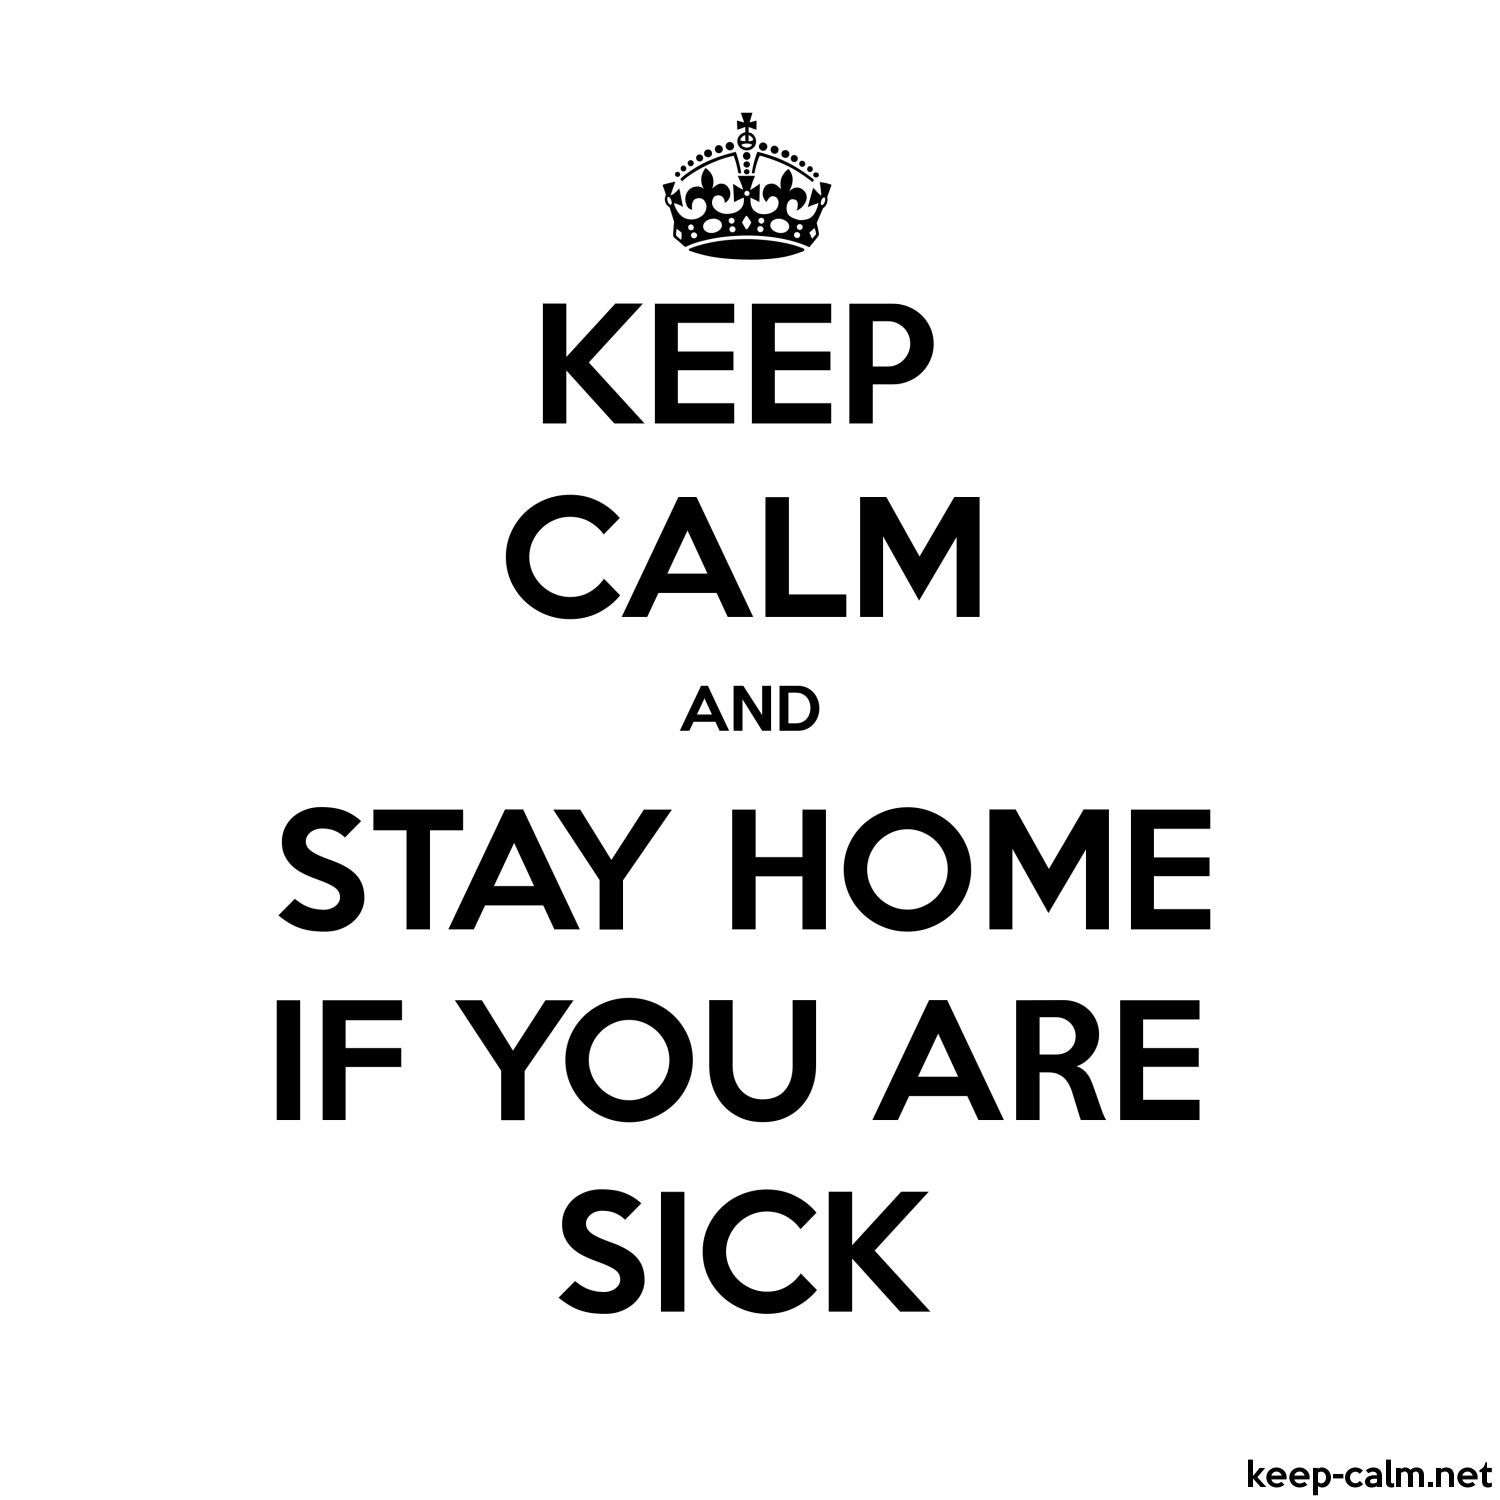 KEEP CALM AND STAY HOME IF YOU ARE SICK